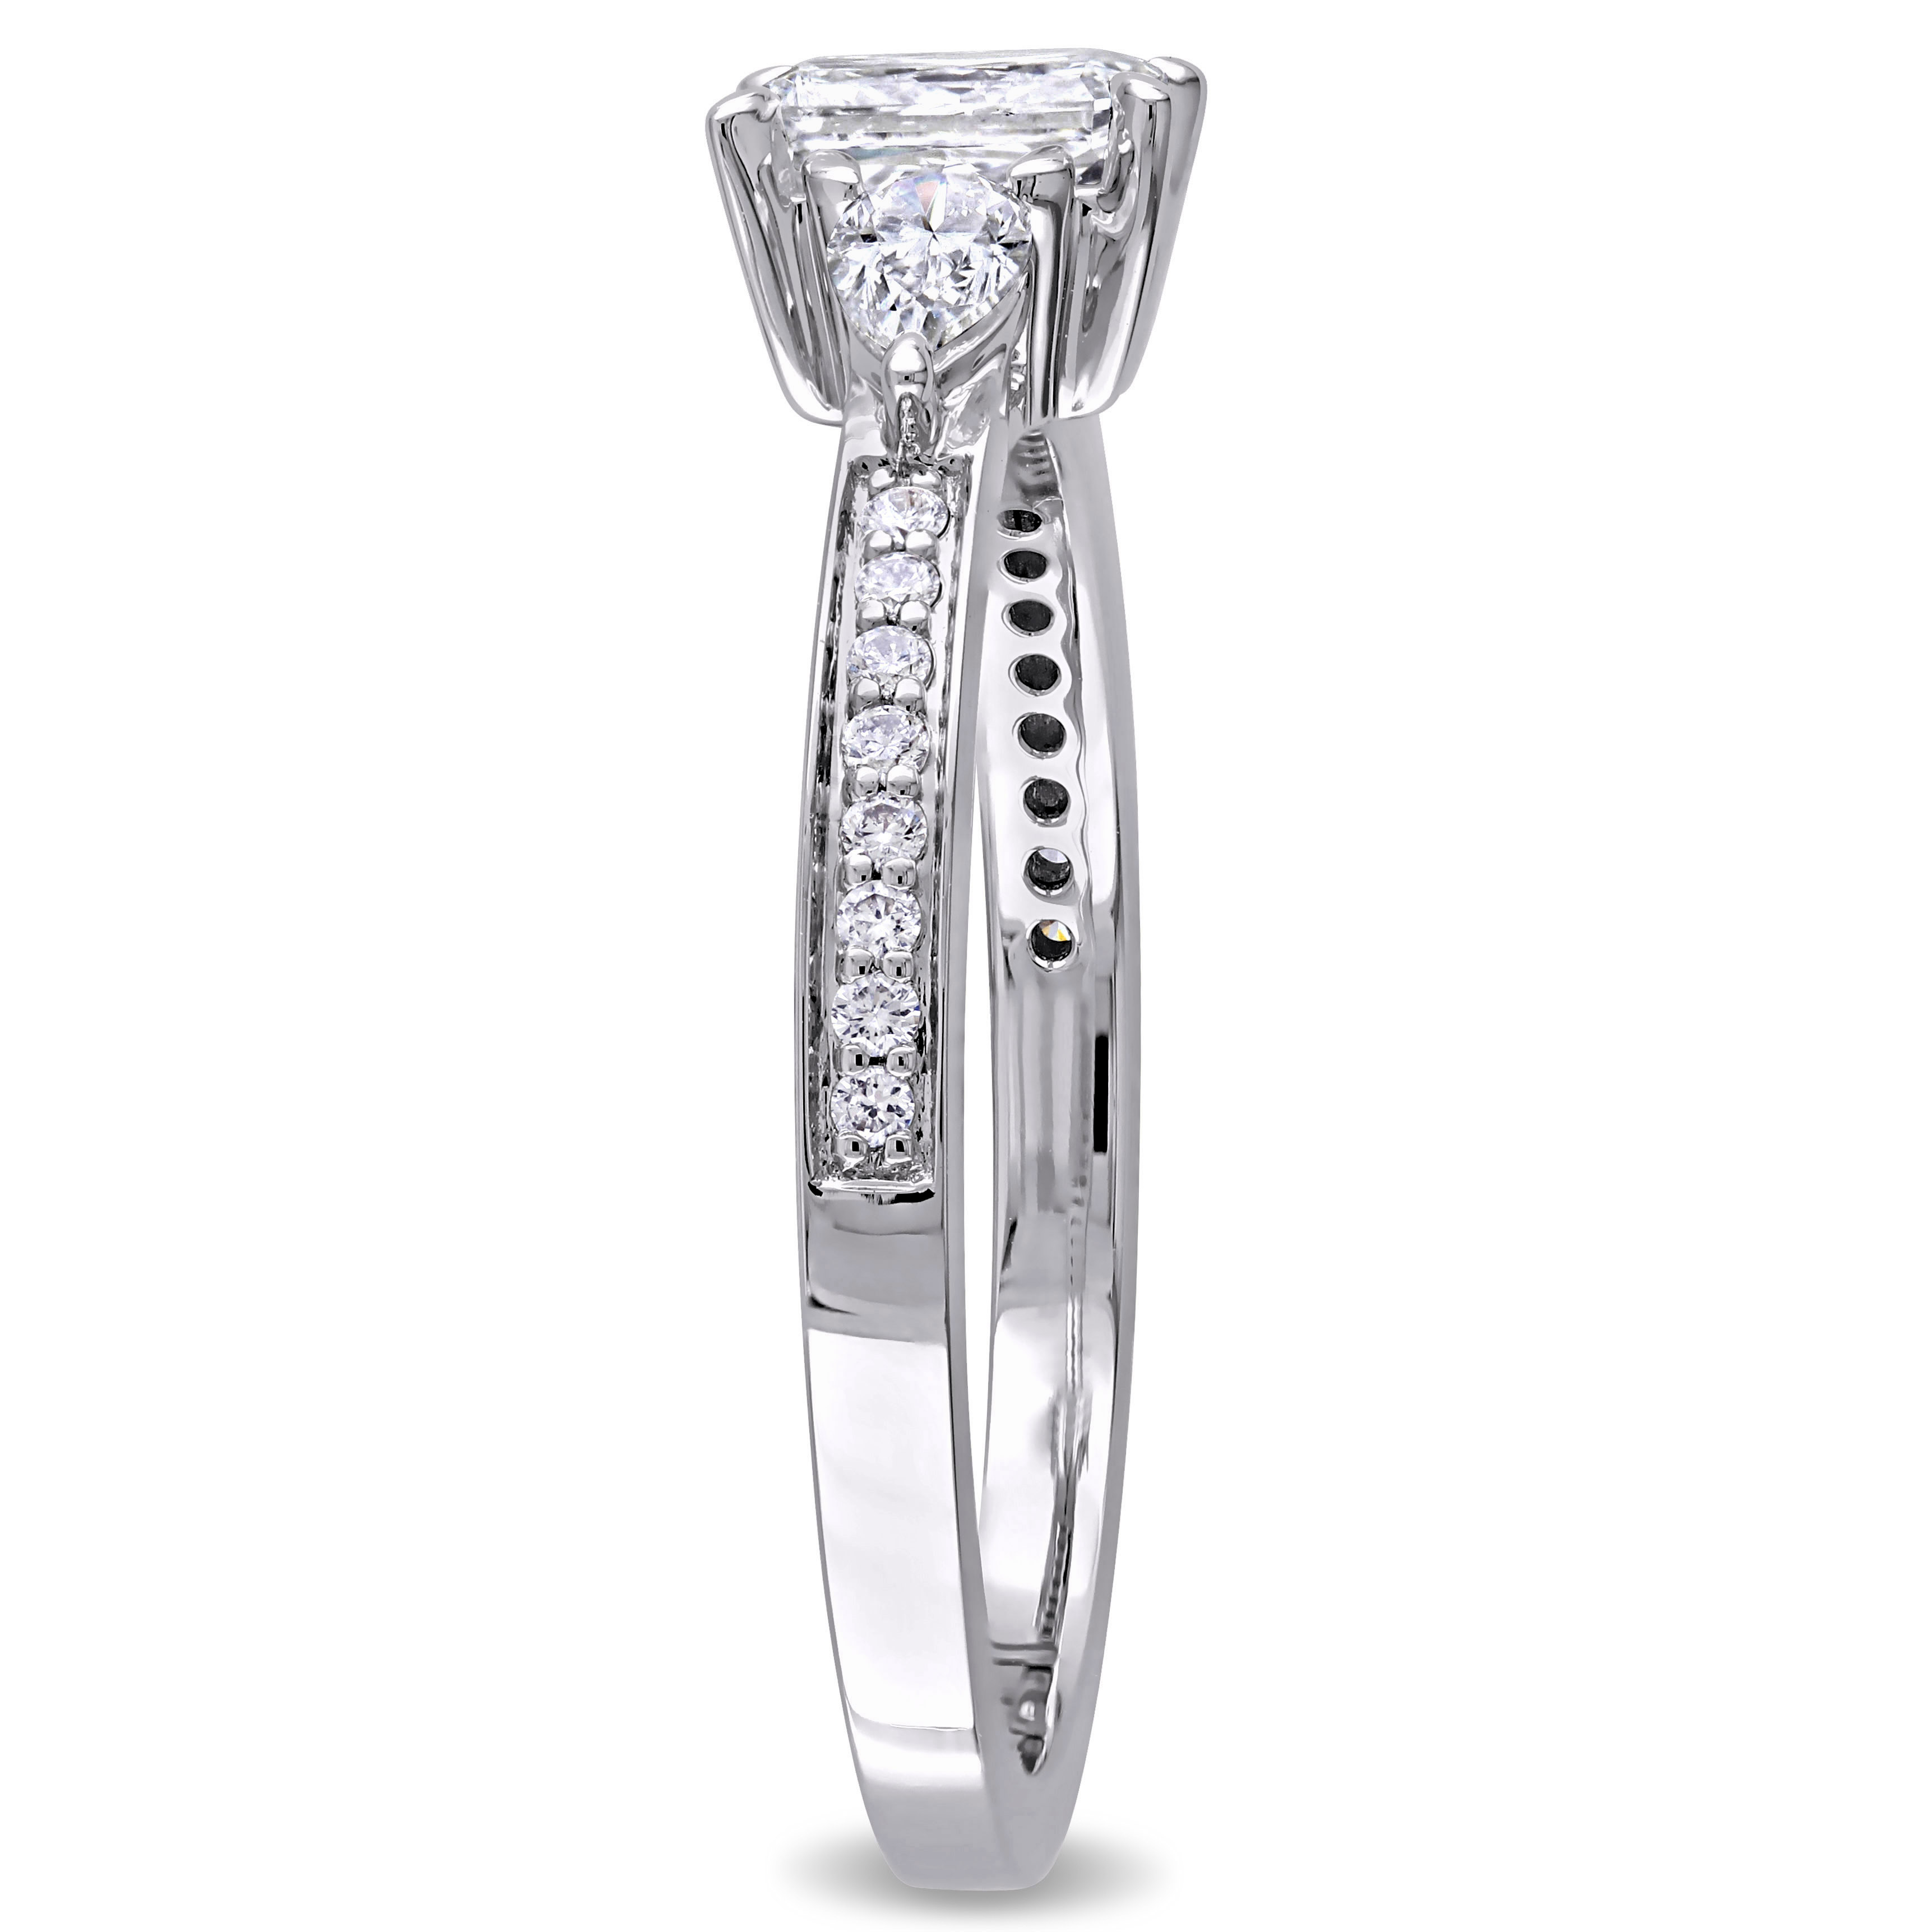 5/8 CT TW Radiant and Pear-cut 3-Stone Diamond Engagement Ring in 14k White Gold